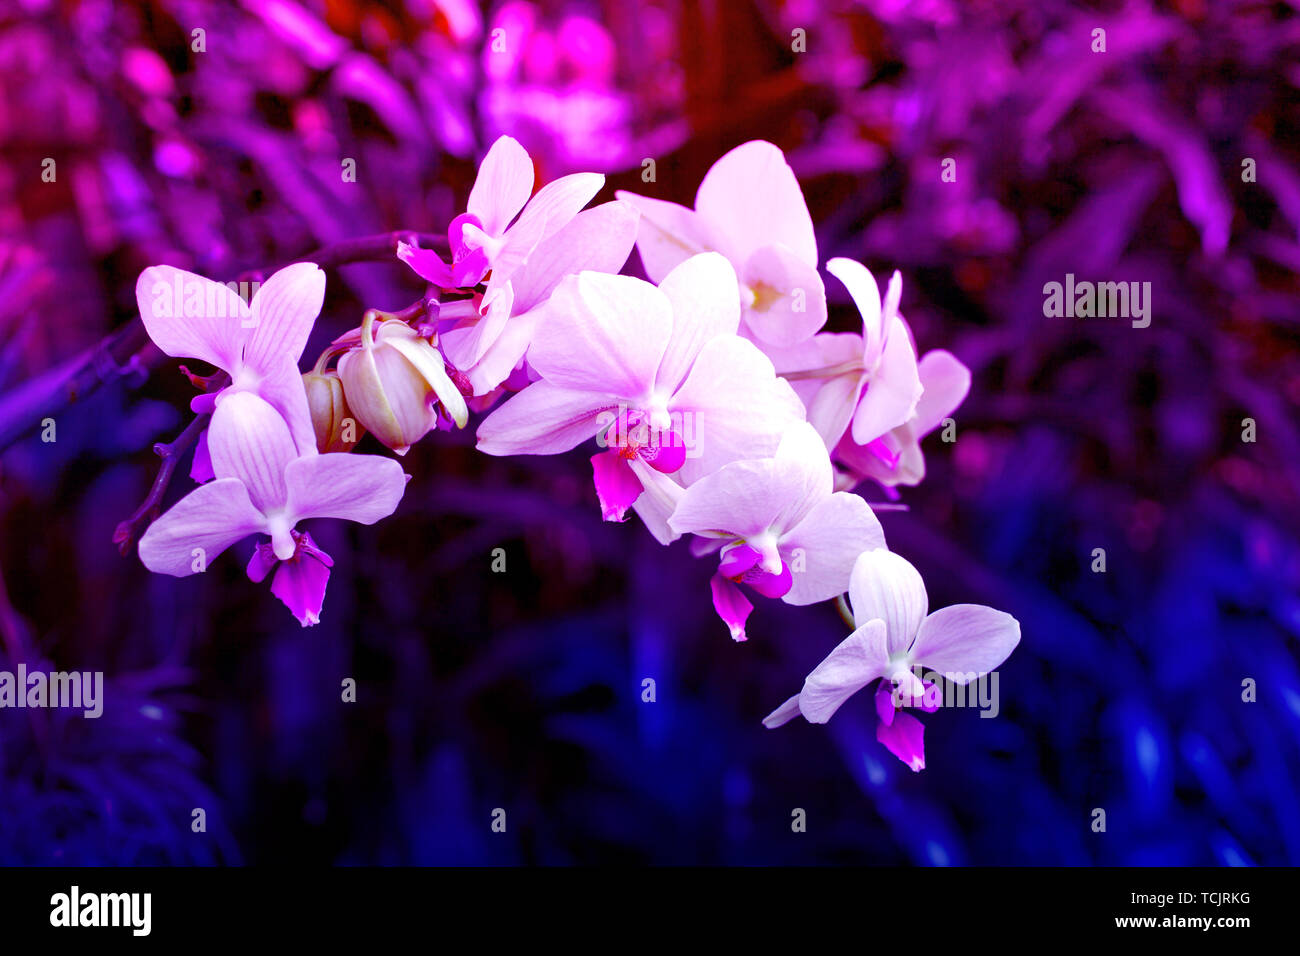 Neon toned orchid flowers Background. Jungle purple pink lights composition  Stock Photo - Alamy